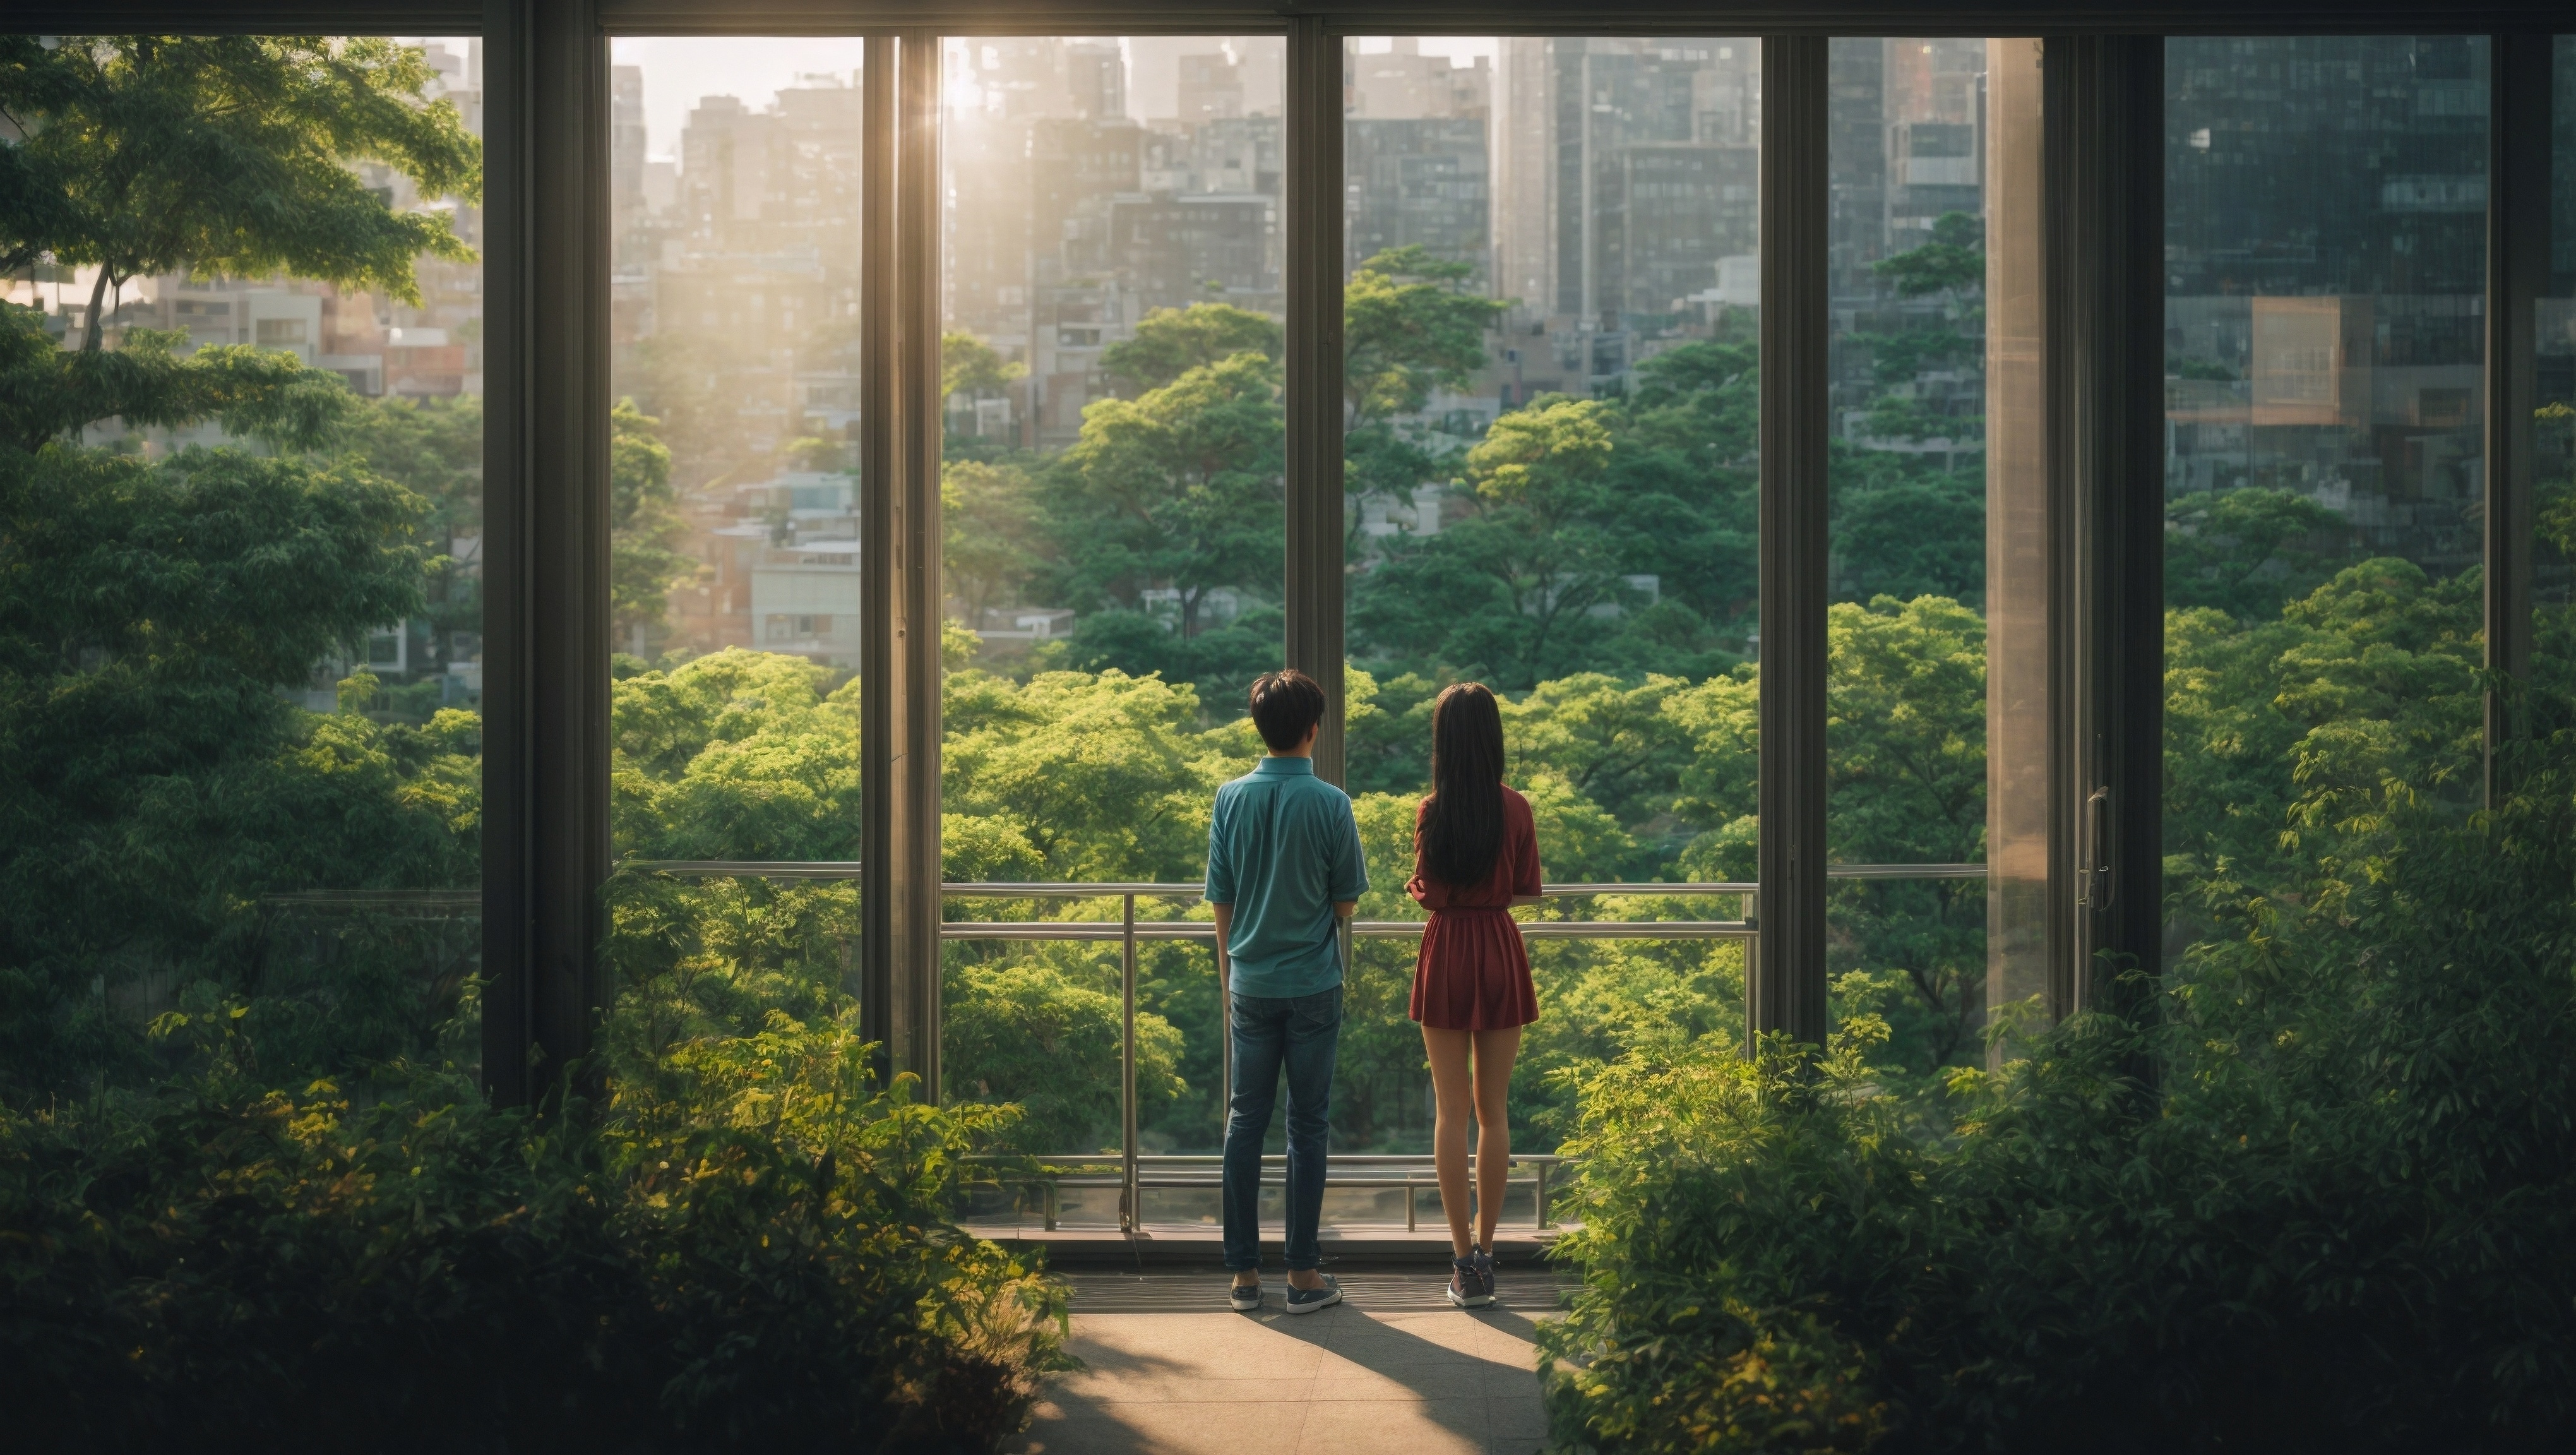 Two people are standing on a balcony looking out over the forest.